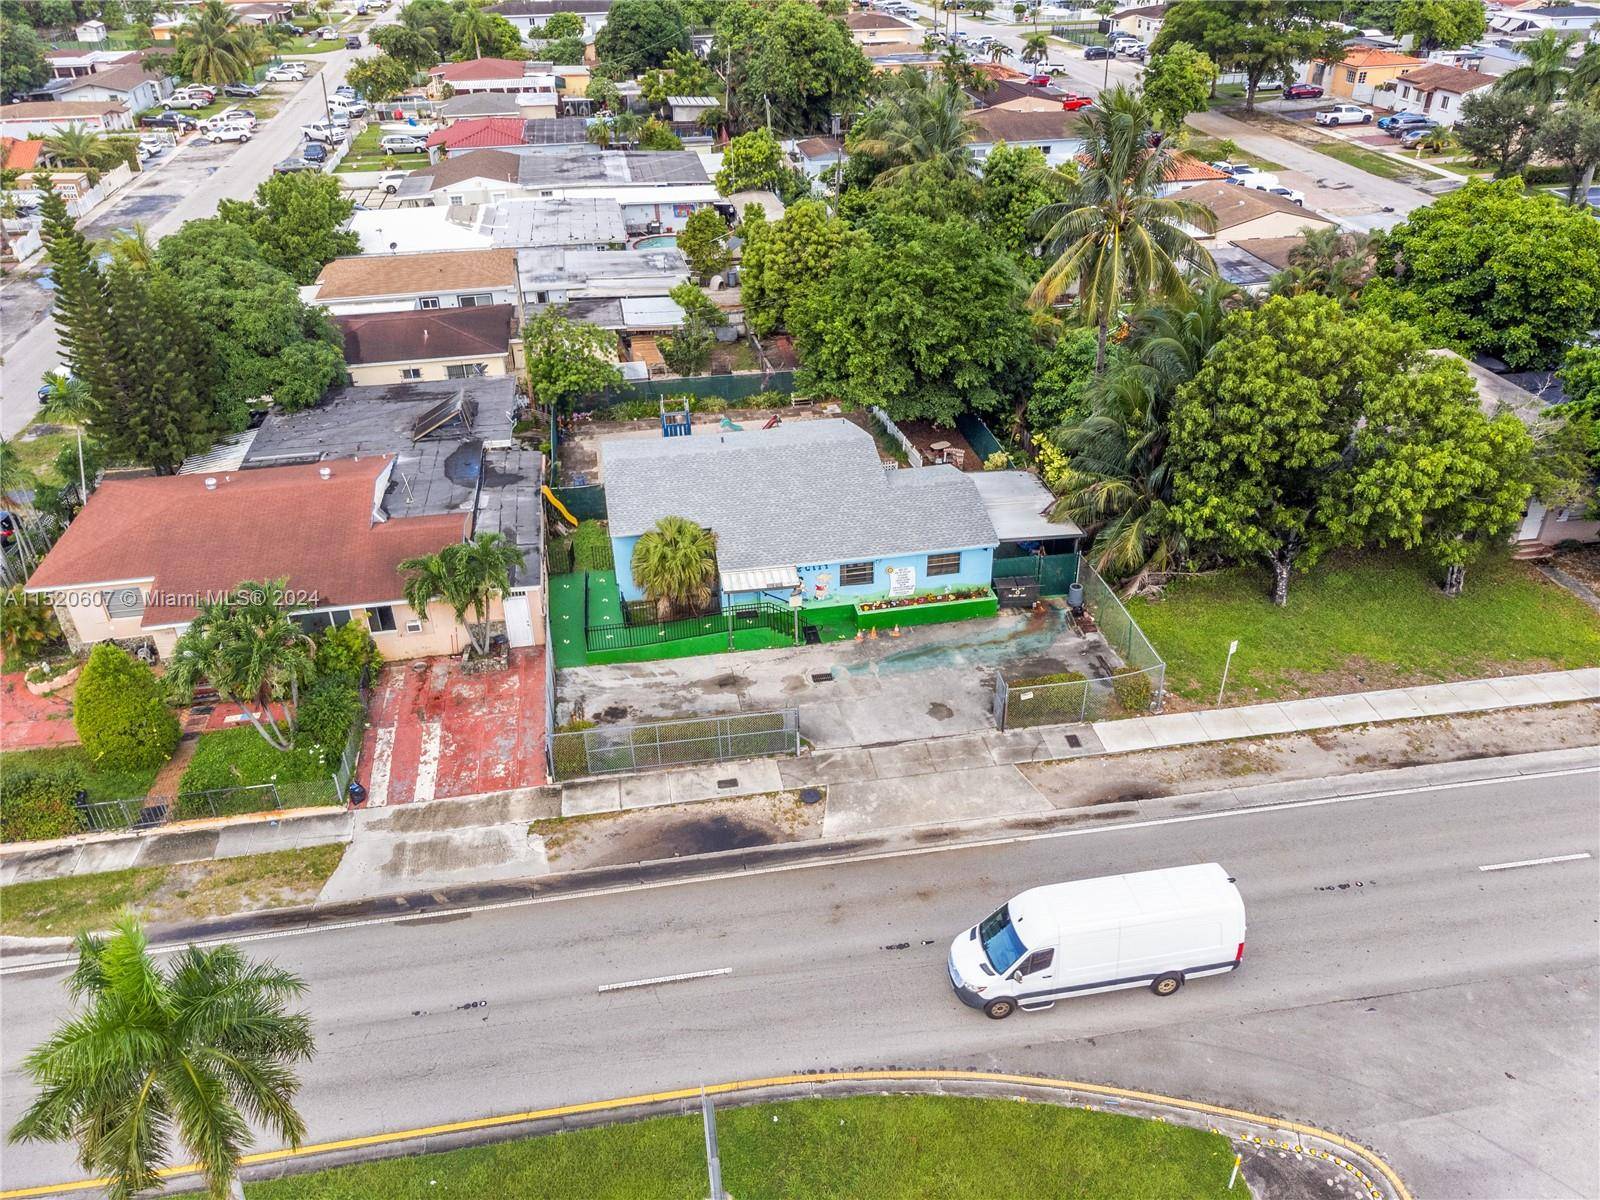 Highly desirable area, within 1 mile from the METRO Center project which will have 1, 600 rental units Selling the real estate and business which has been running for over ...